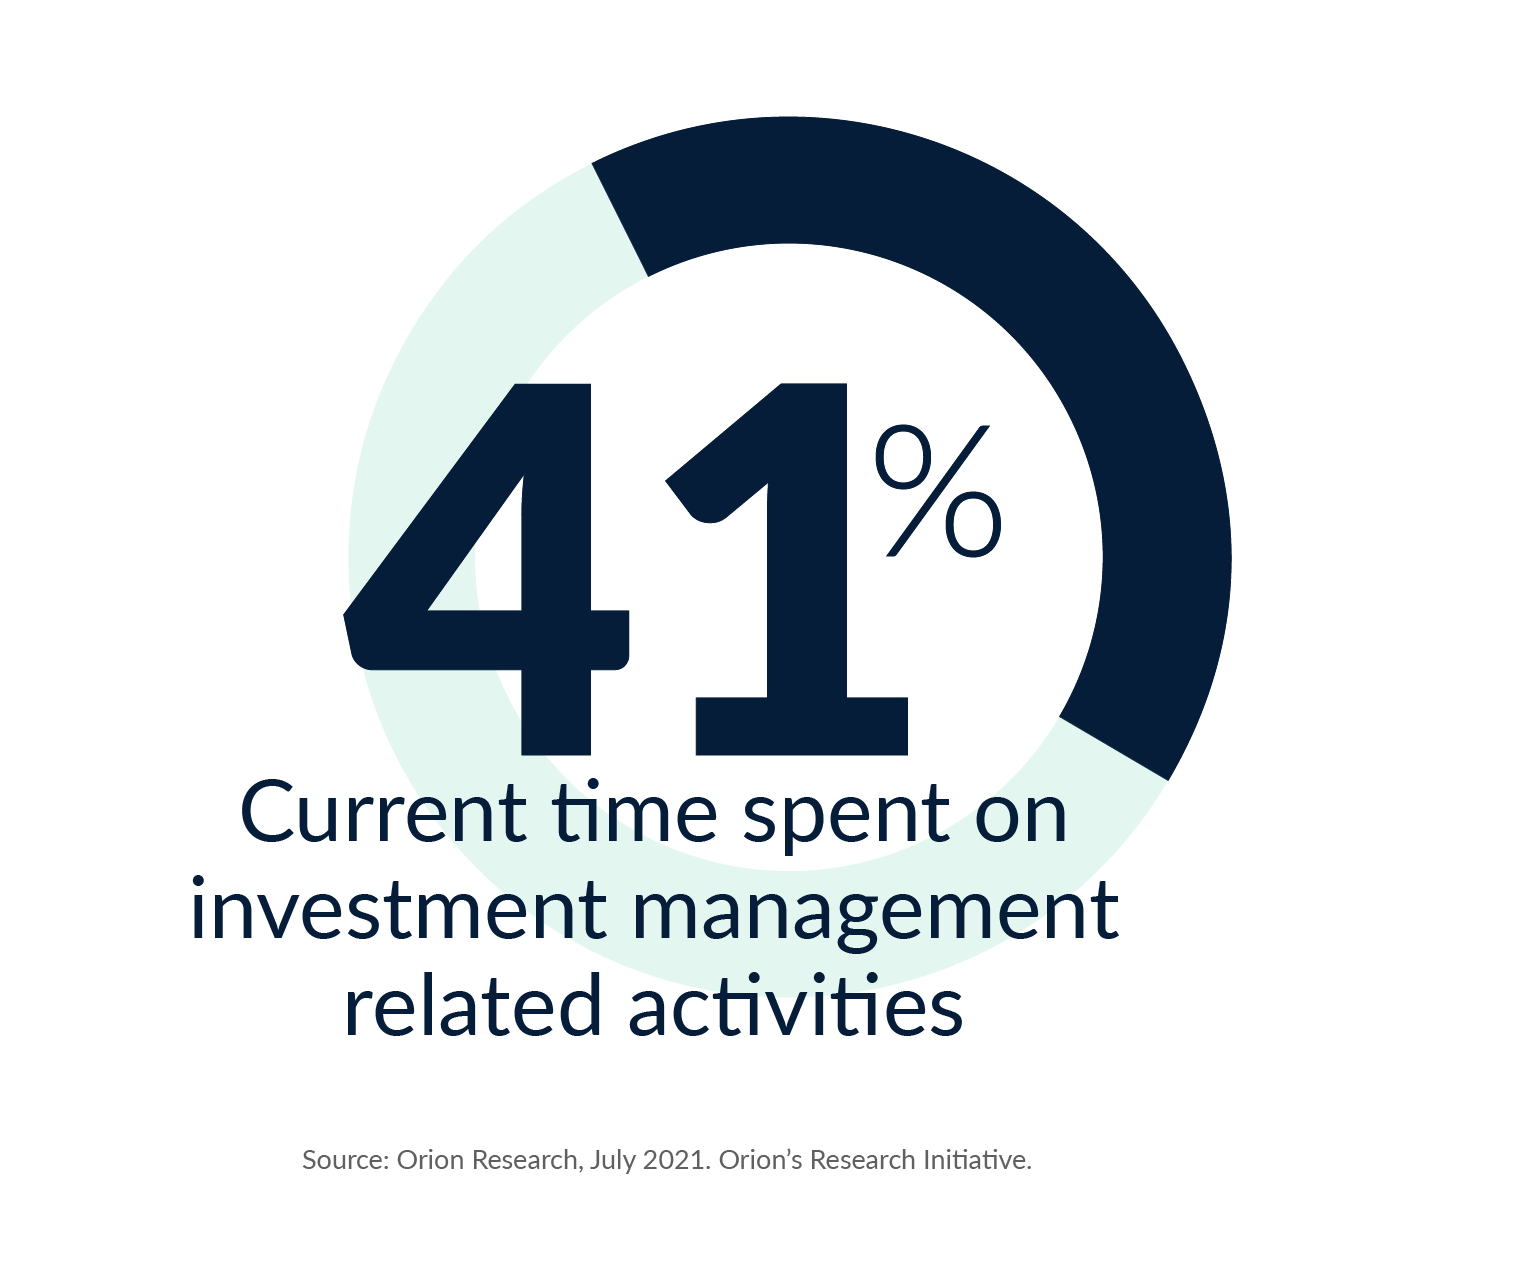 Statistics: Current time spent on investment management related activities is 41%